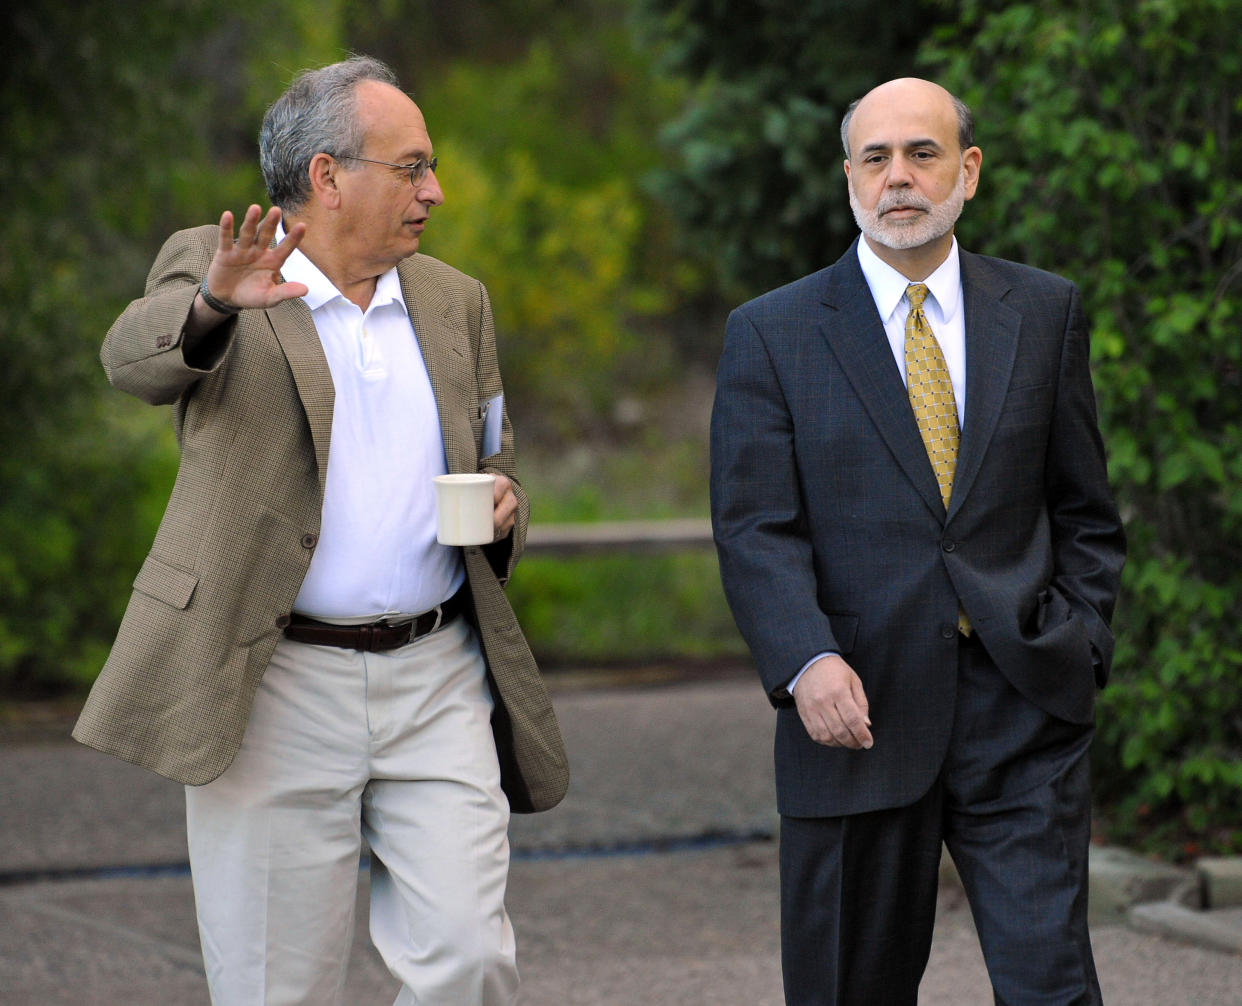 Federal Reserve Vice Chairman Donald Kohn walks with Federal Reserve Chairman Ben Bernanke (R) as they take a brief morning break at the Jackson Hole Economic Symposium in Grand Teton National Park, August 27, 2010. REUTERS/Price Chambers (UNITED STATES - Tags: POLITICS BUSINESS IMAGES OF THE DAY)